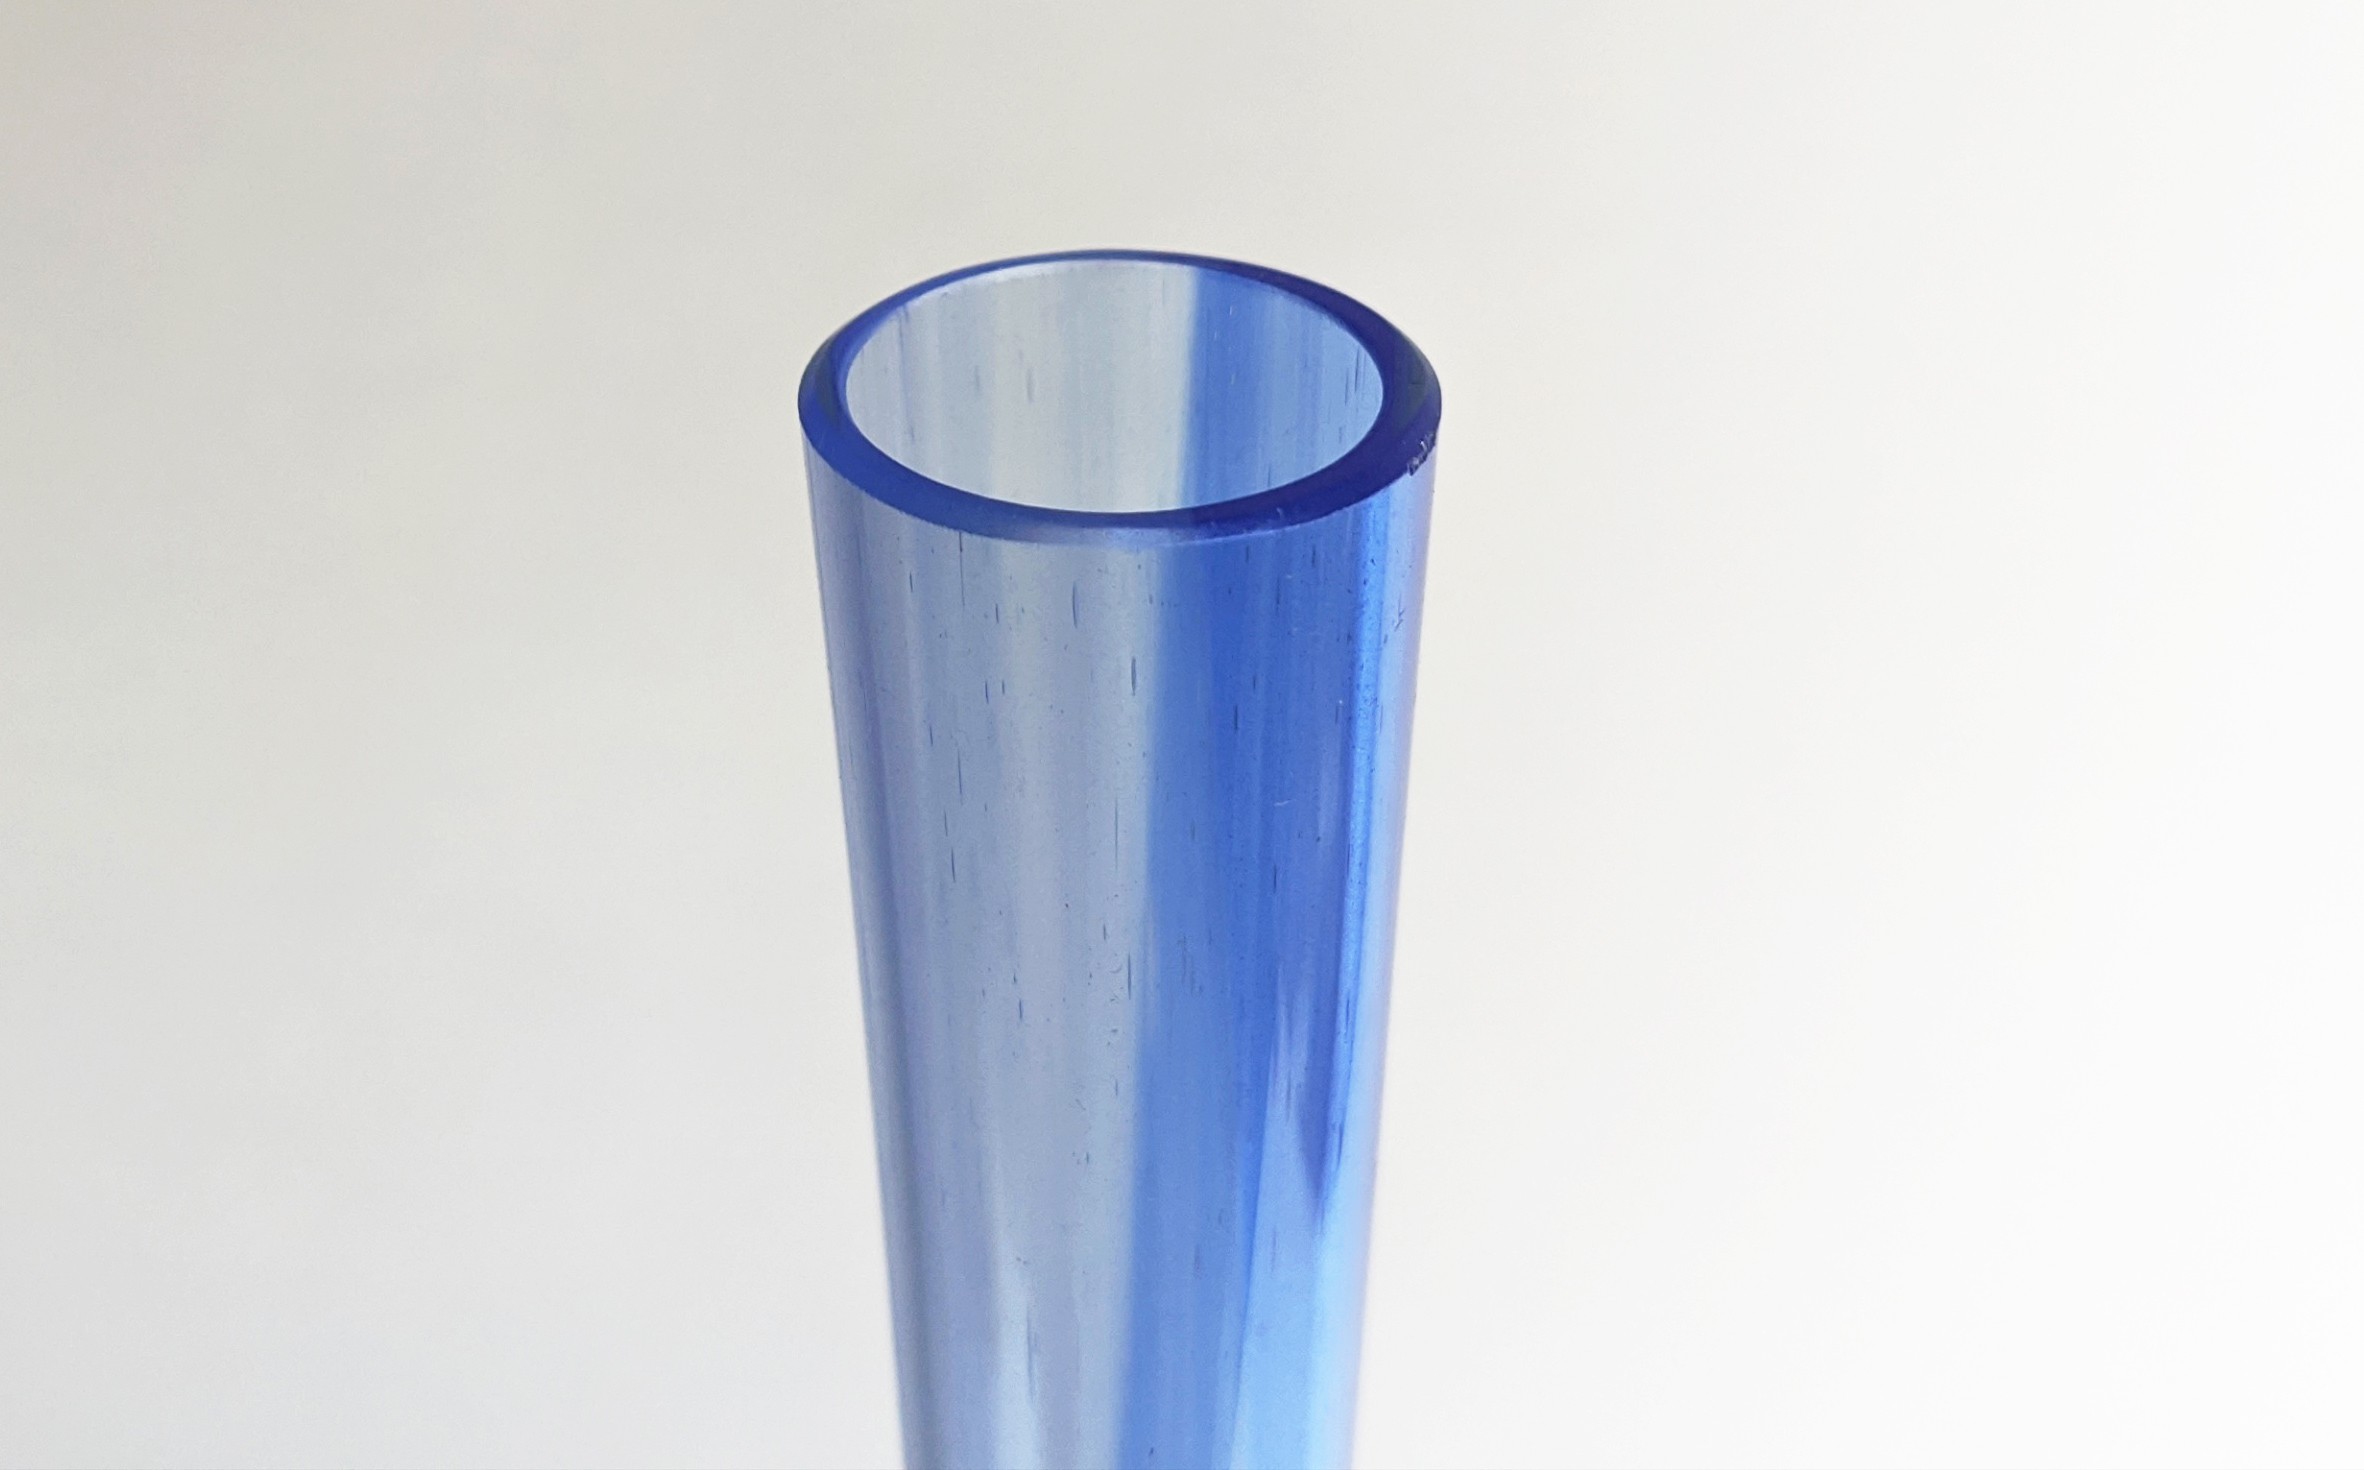 A MURANO TALL BLUE GLASS VASE, of baluster form with an elongated neck, with varying shades of - Image 3 of 5